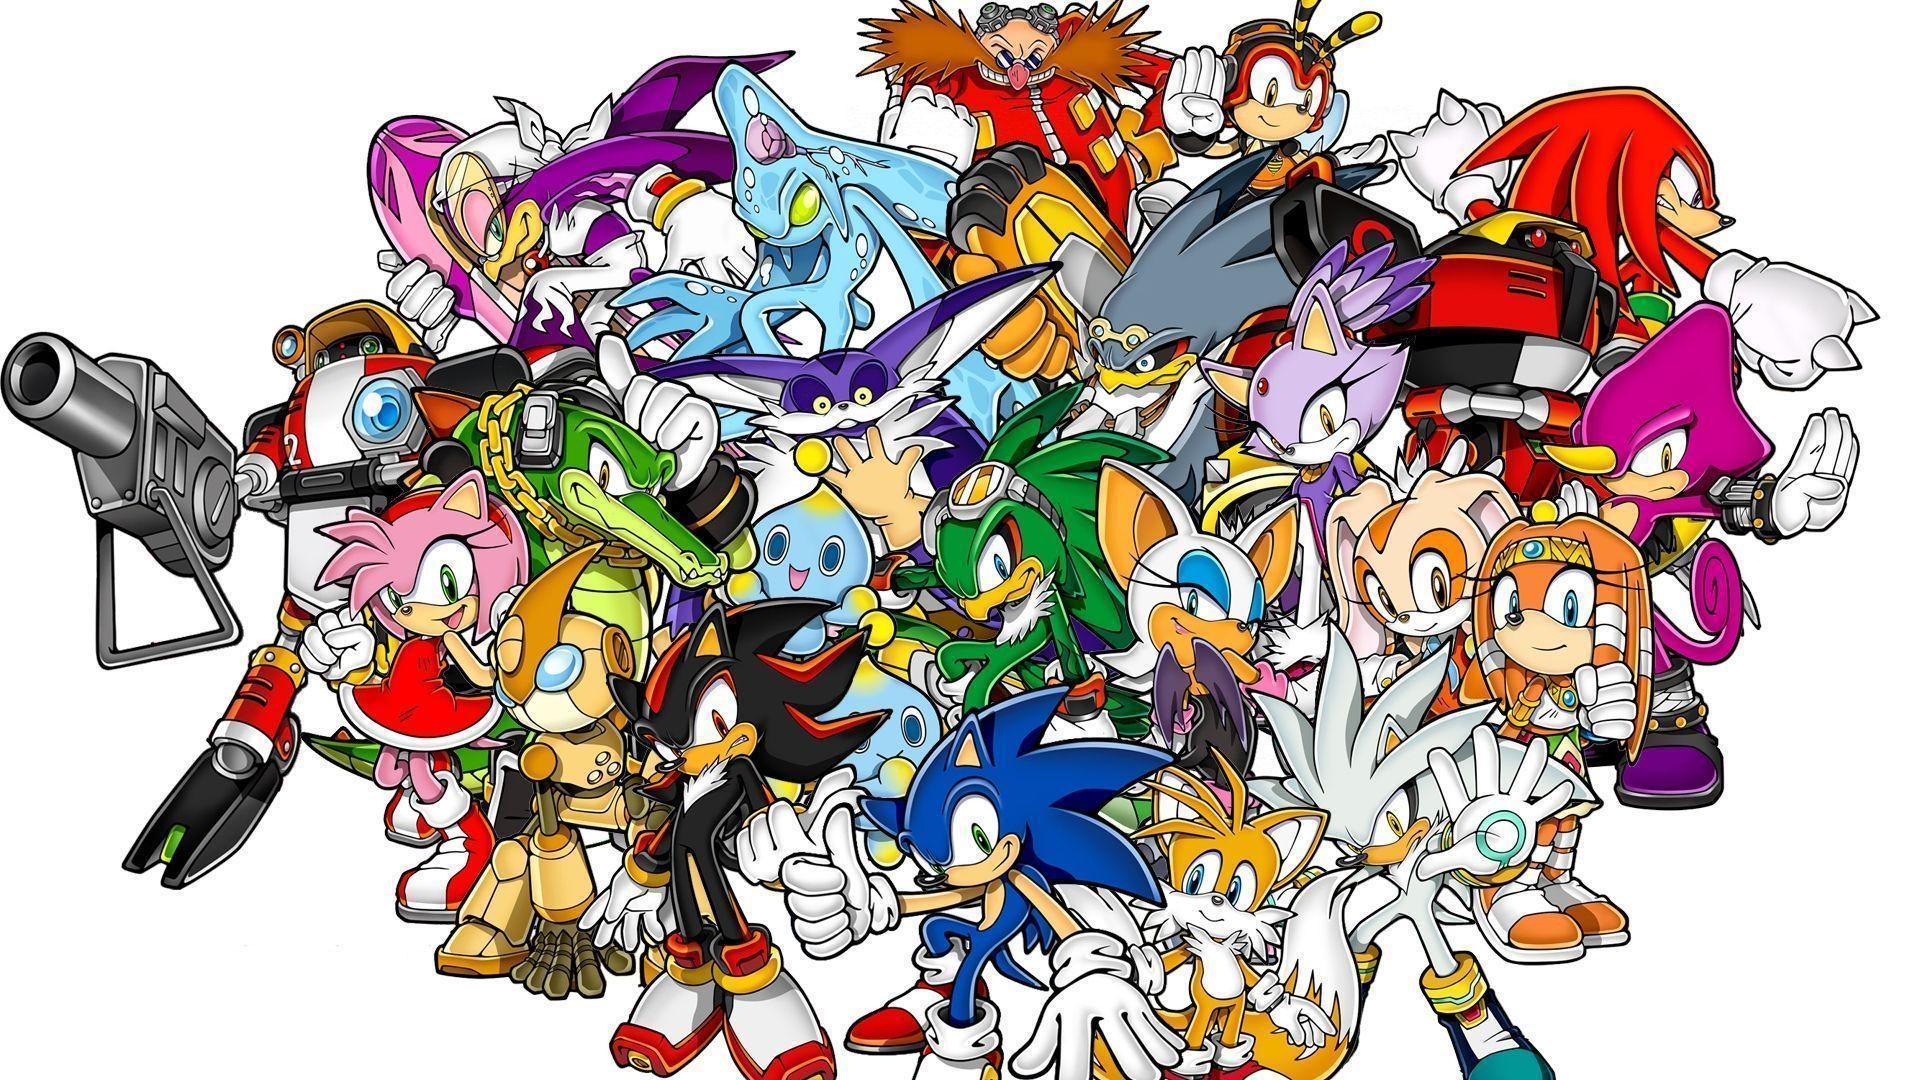 1920x1080 Sonic Team confirm new Sonic the Hedgehog game for 2017